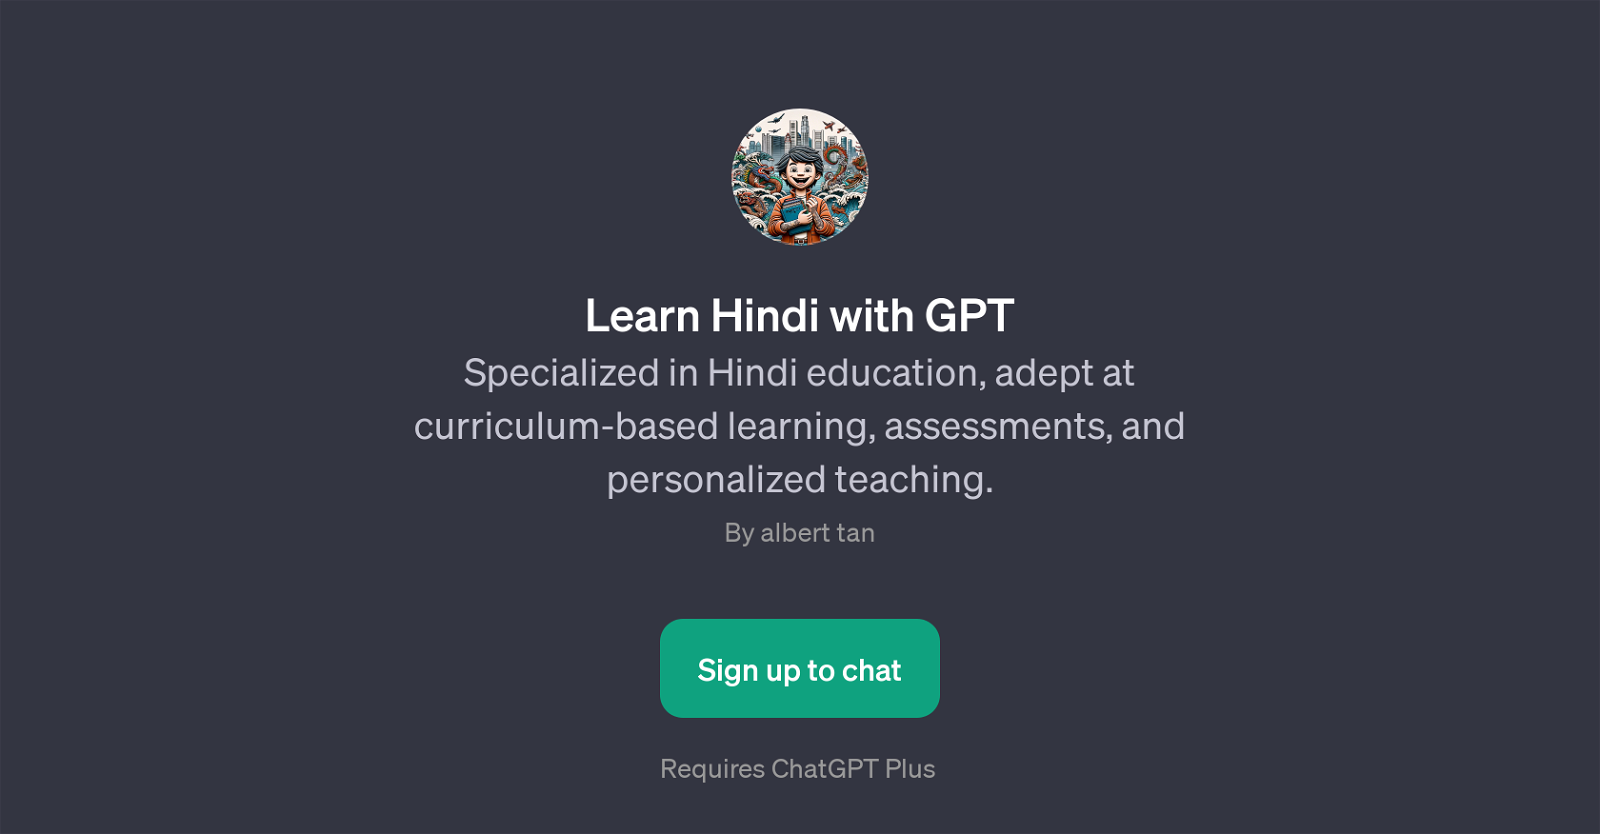 Learn Hindi with GPT website